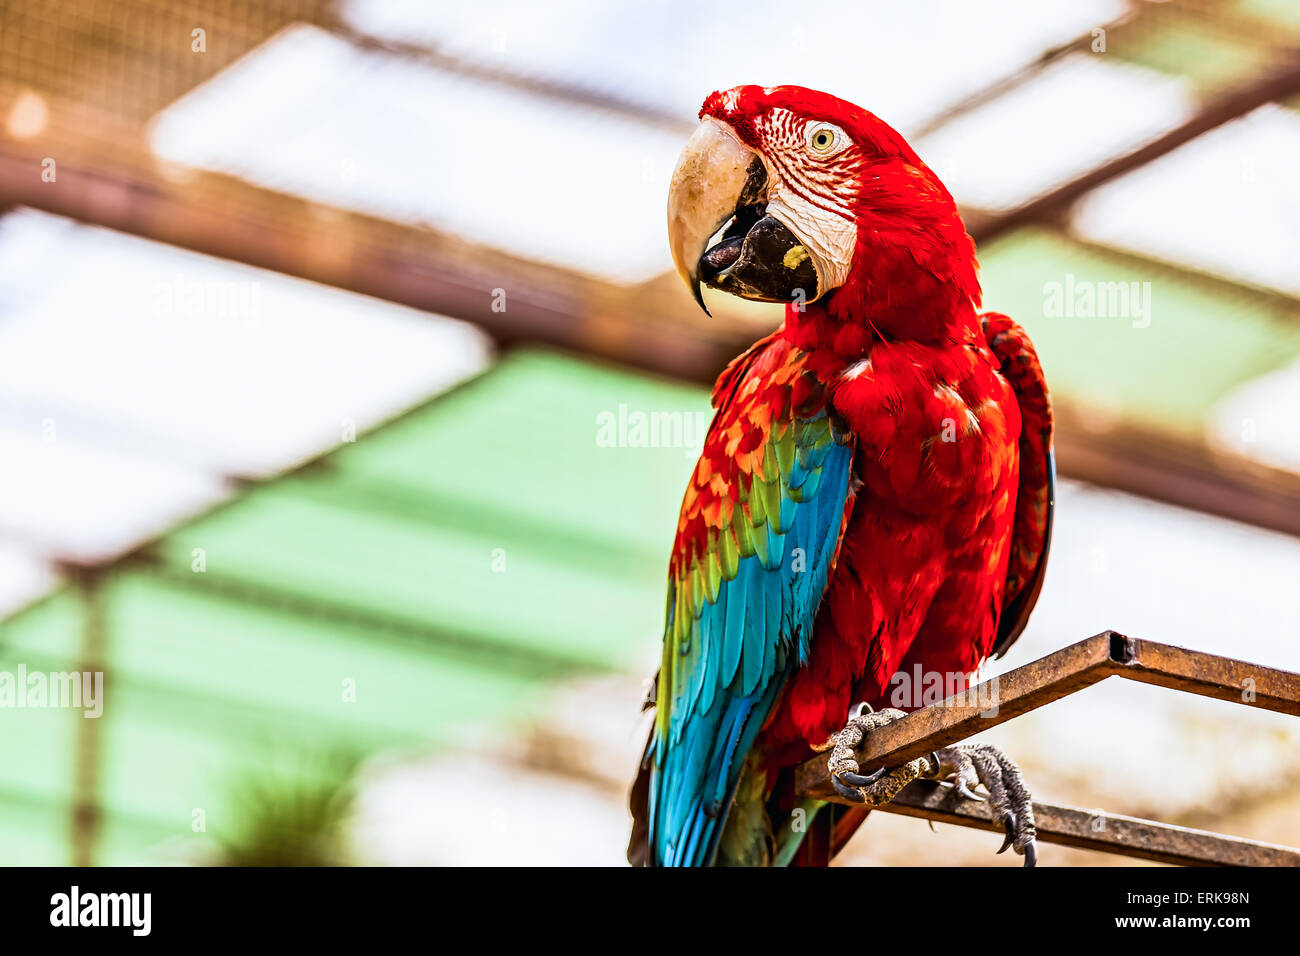 Red Macaw or Ara cockatoos parrot siting on metal perch Stock Photo